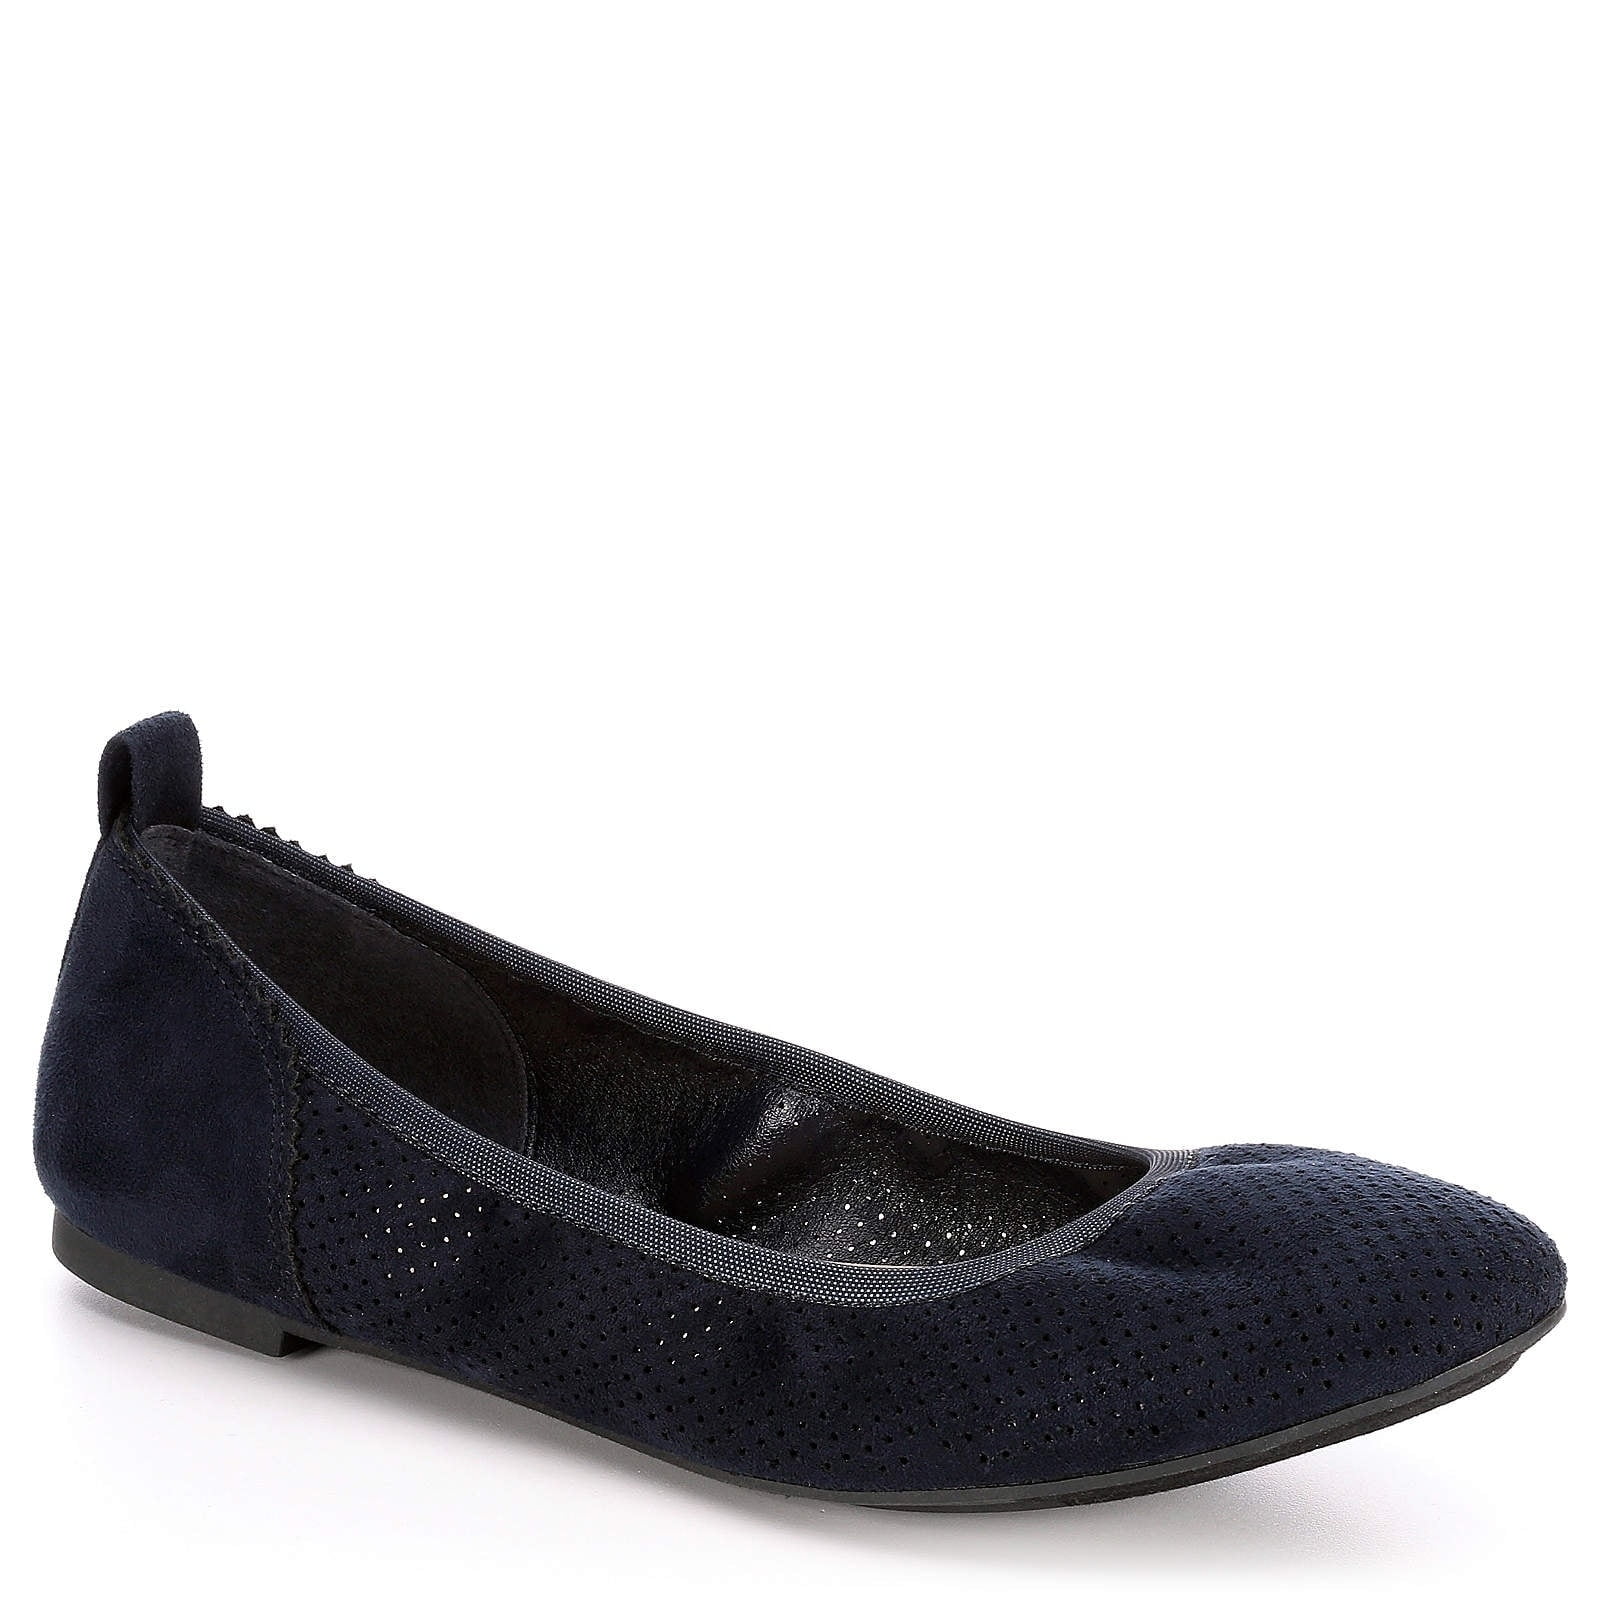 XAPPEAL Womens Clair Slip On Ballet Flat Shoes, Navy - Walmart.com